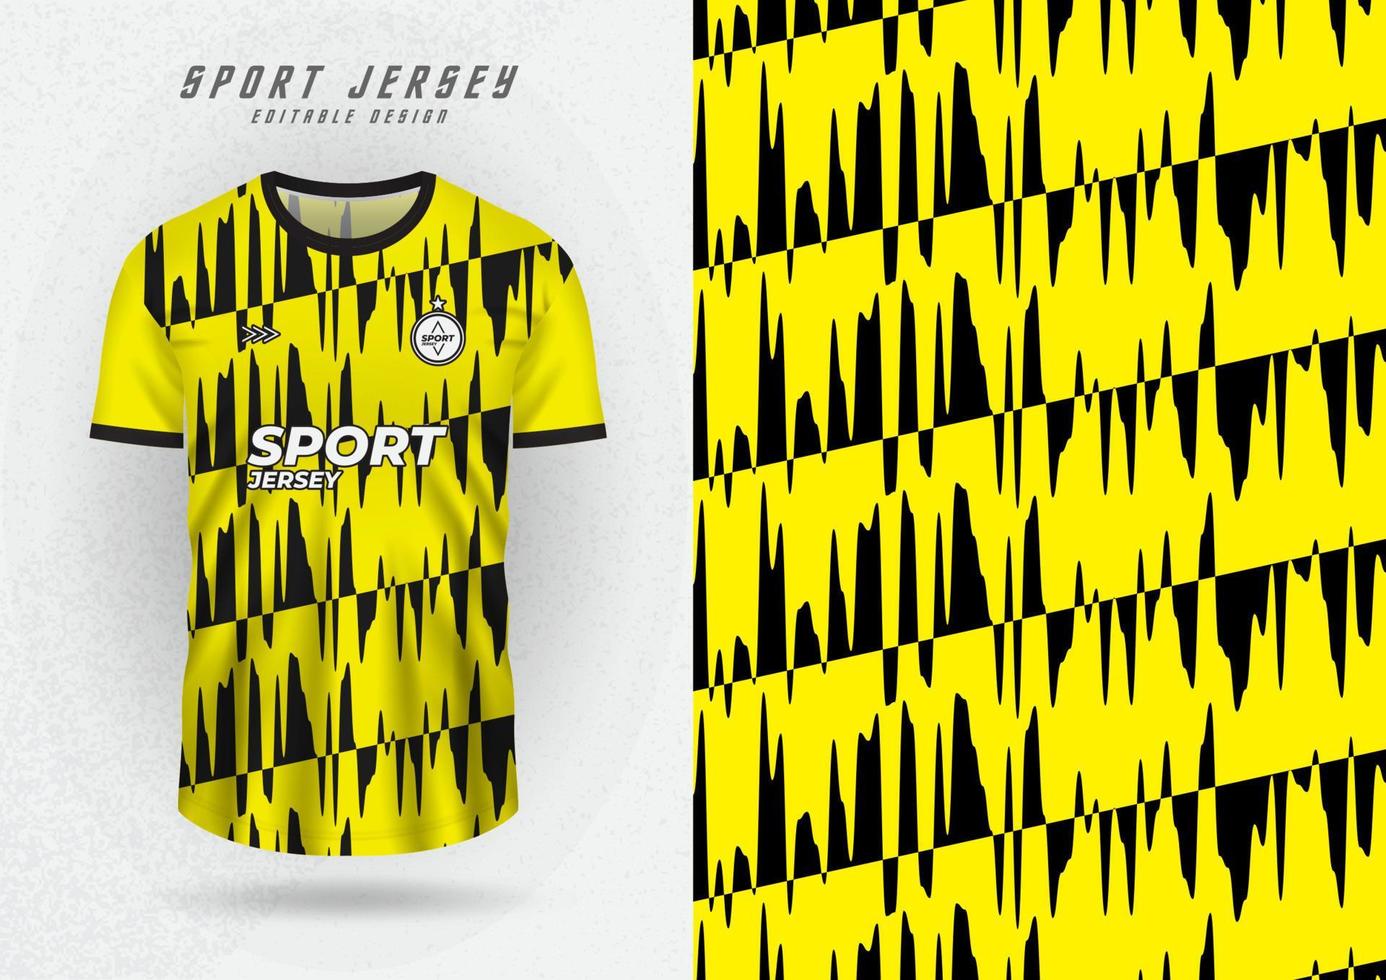 mockup background for sports jerseys black yellow stripes vector